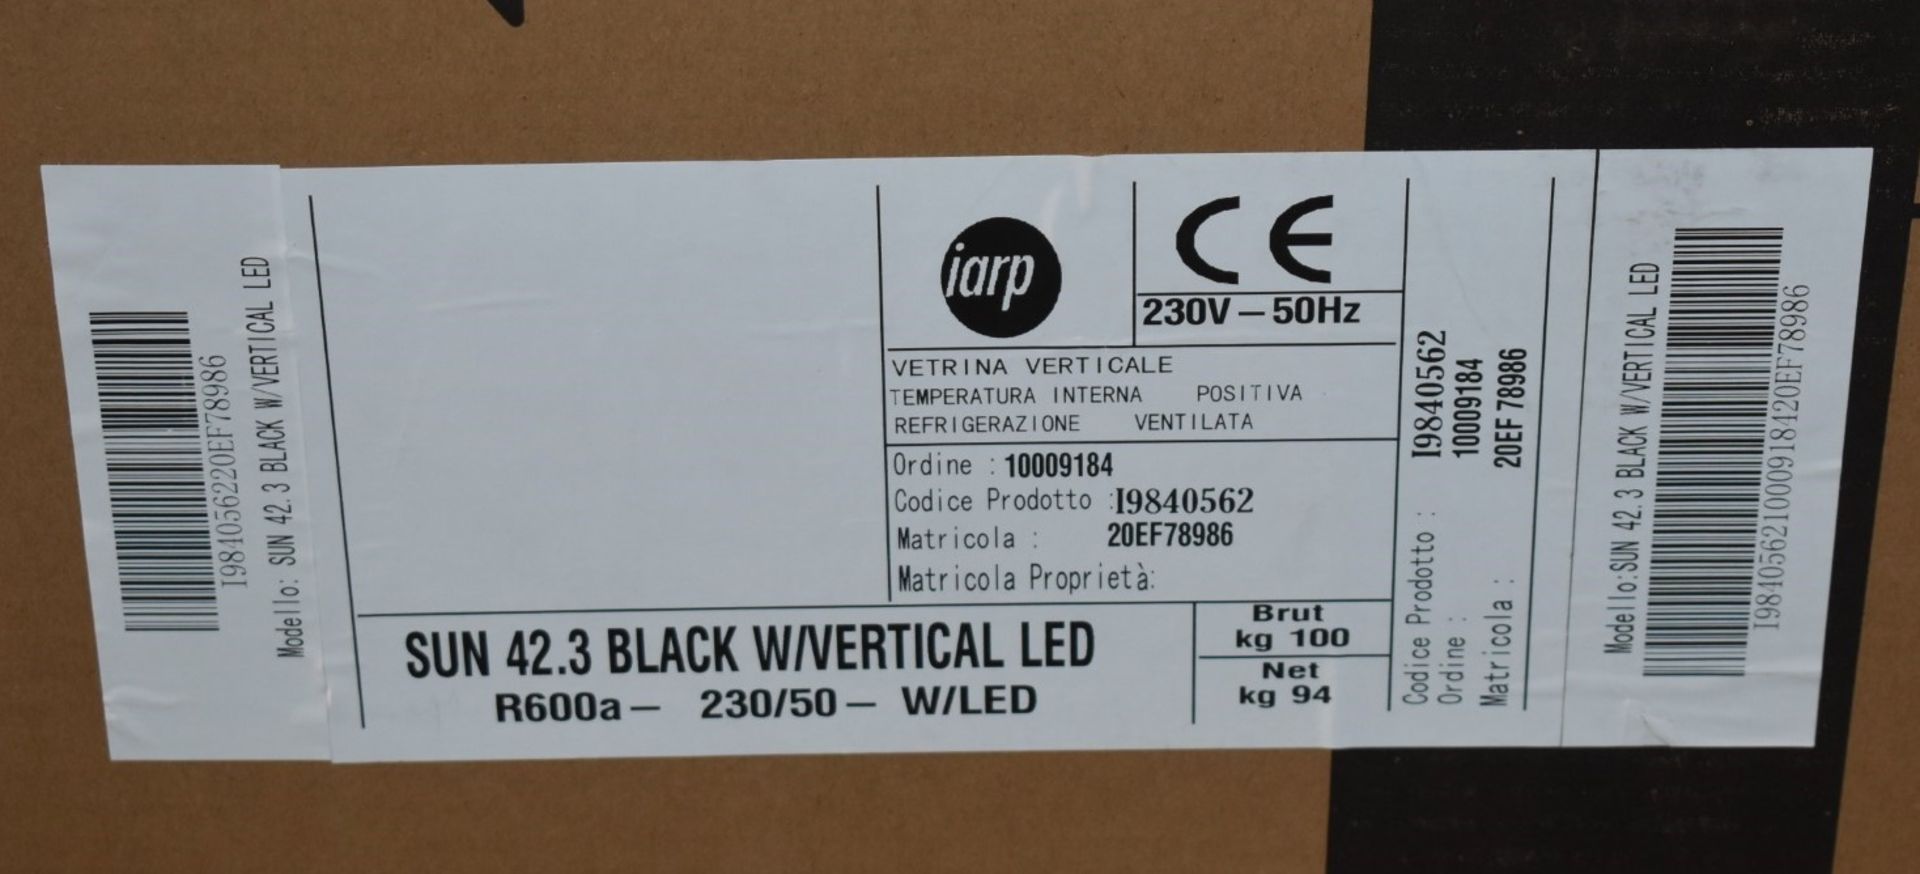 1 x Iarp Sun 42.3 Black Wine Cooler With Vertical LED Lights - Brand New Boxed Stock - Approx RRP £ - Image 3 of 3